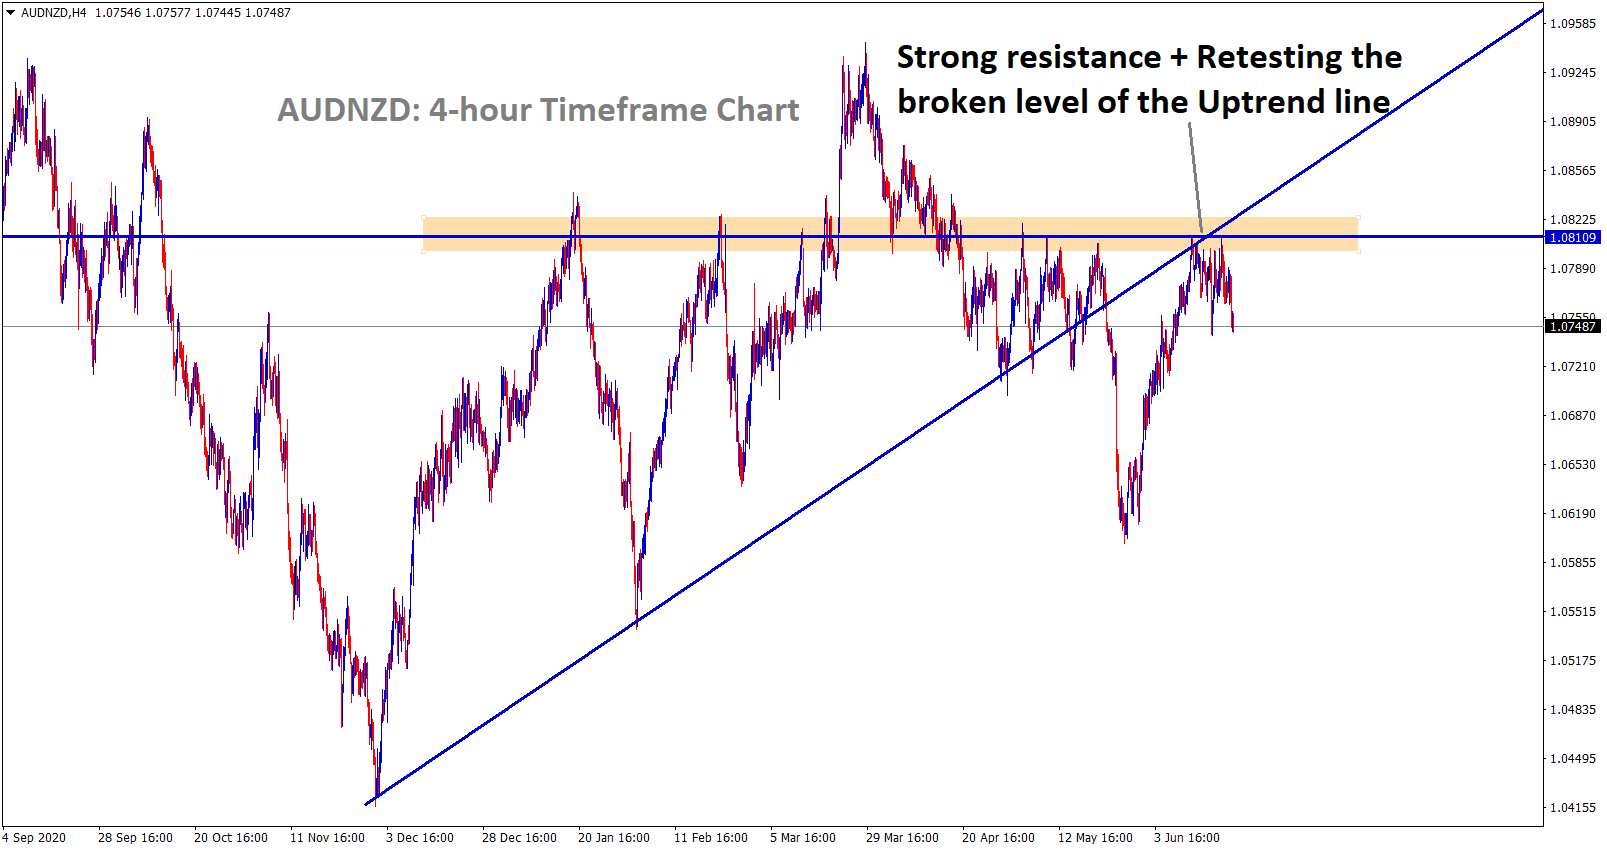 AUDNZD is falling after retesting the broken Uptrend line strong resistance zone